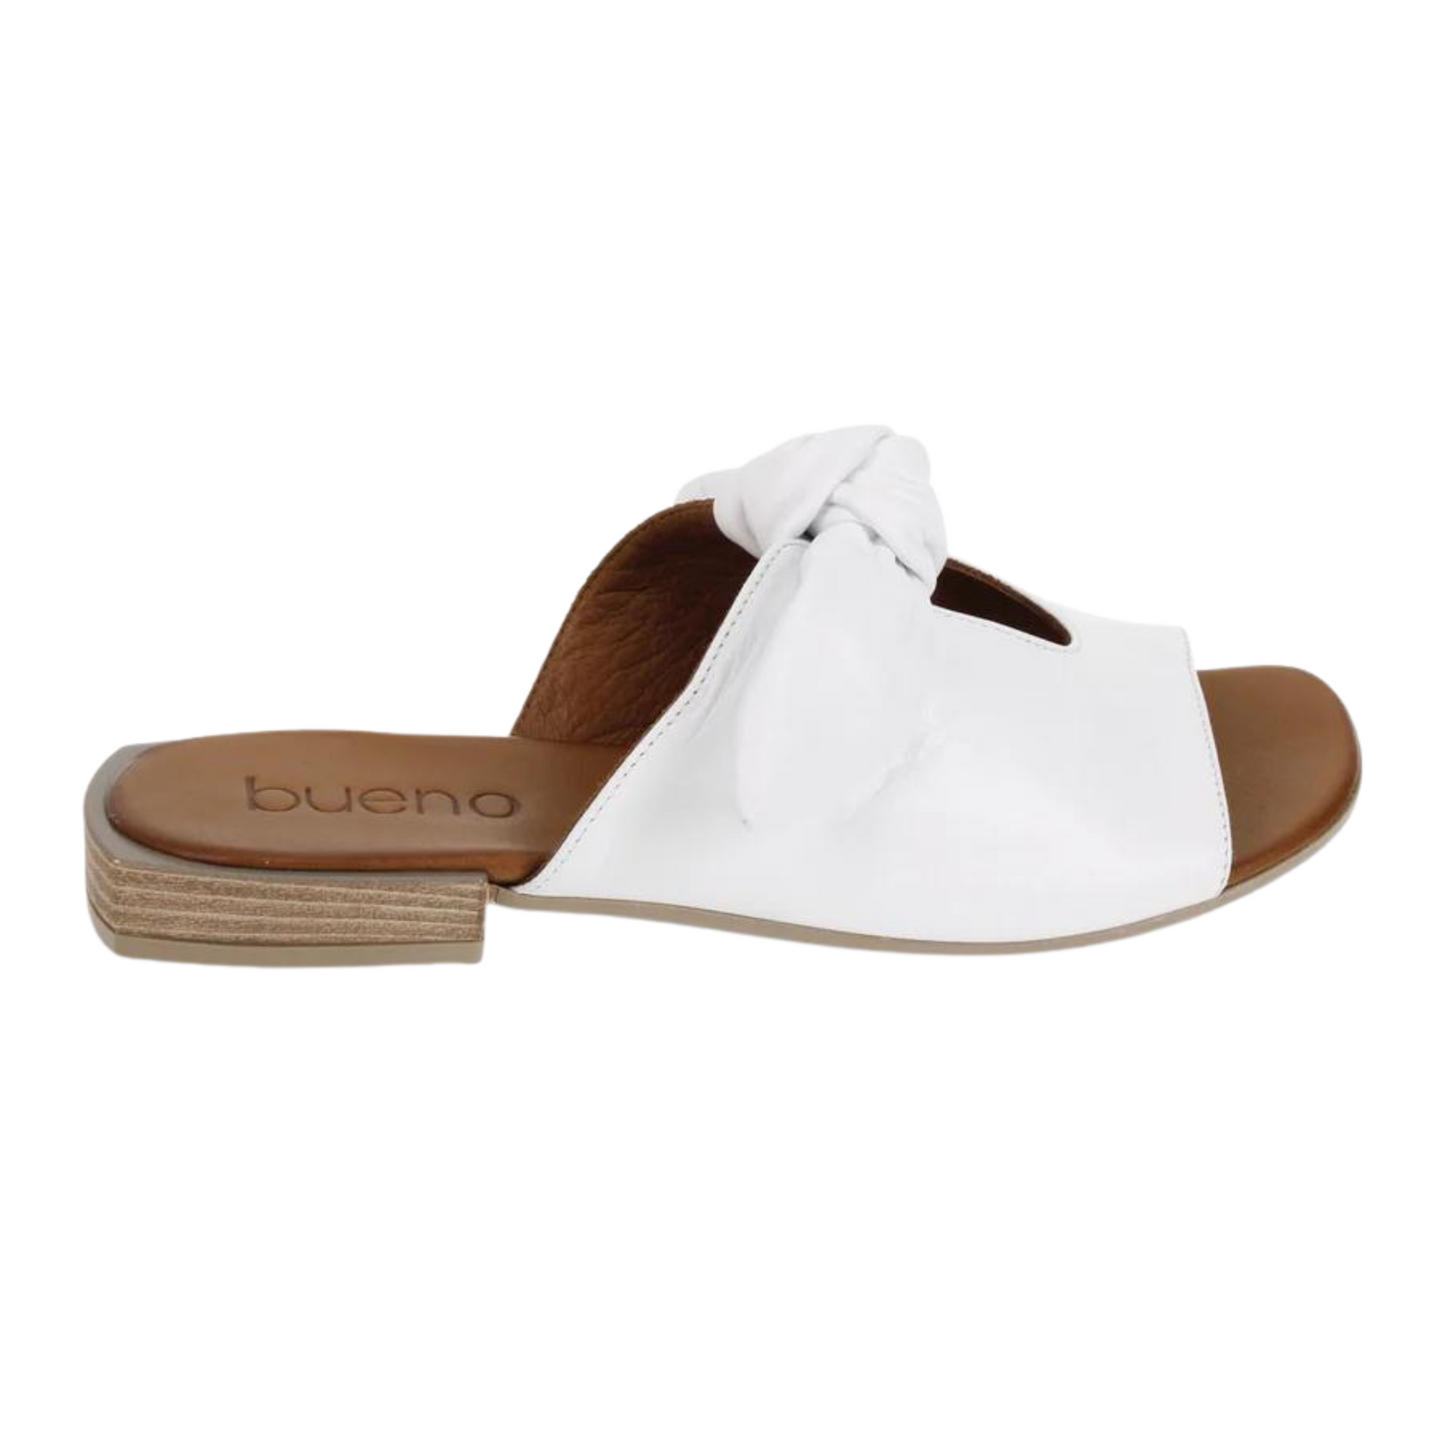 The white leather sandal is pictured in profile showing the midfoot strap with centre cutout, white bow tie band, brown leather sole, and short block heel.